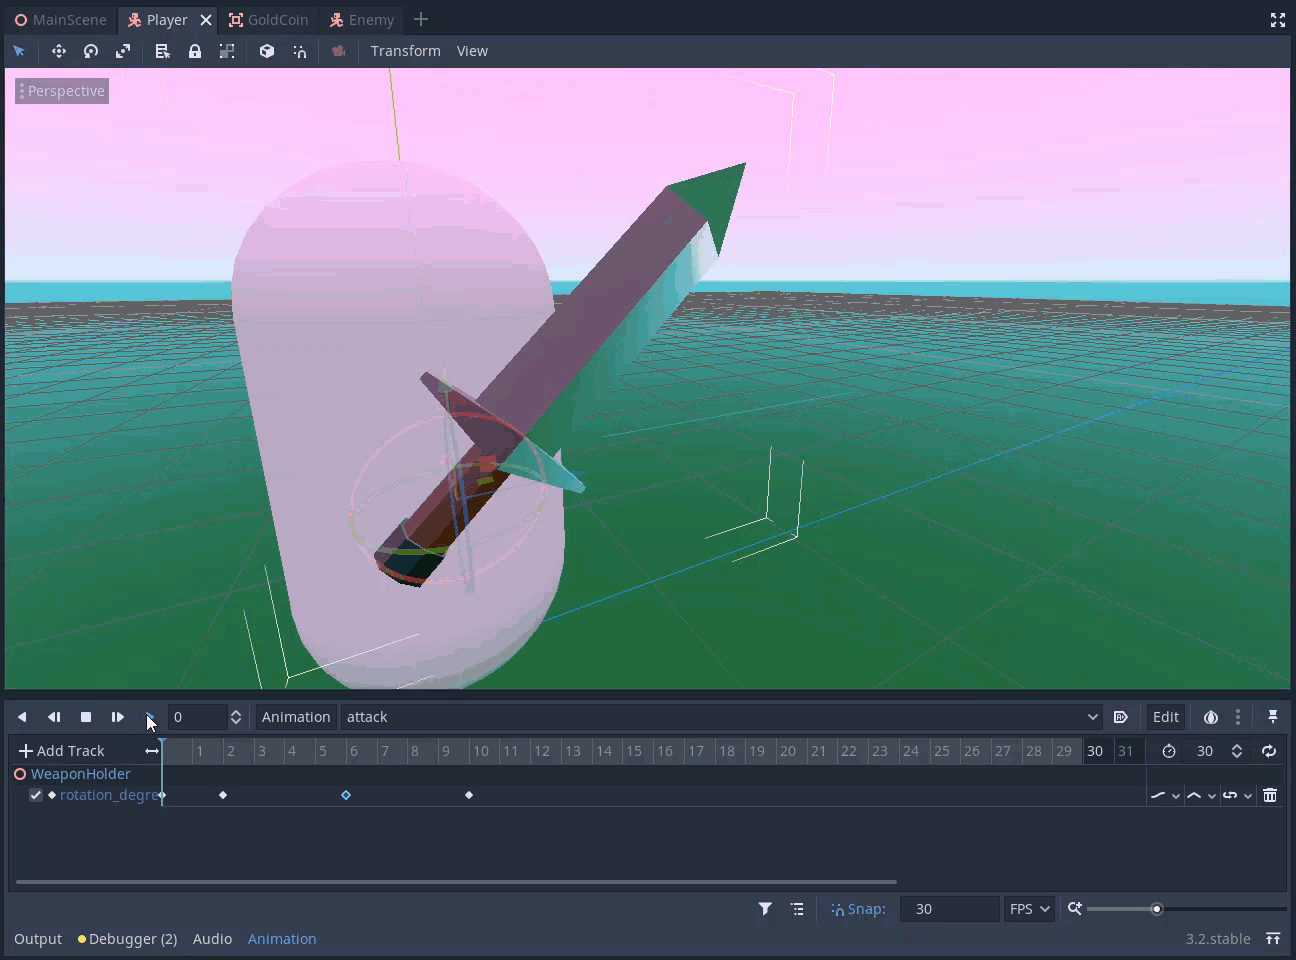 Gif showing sword swinging animation in Godot